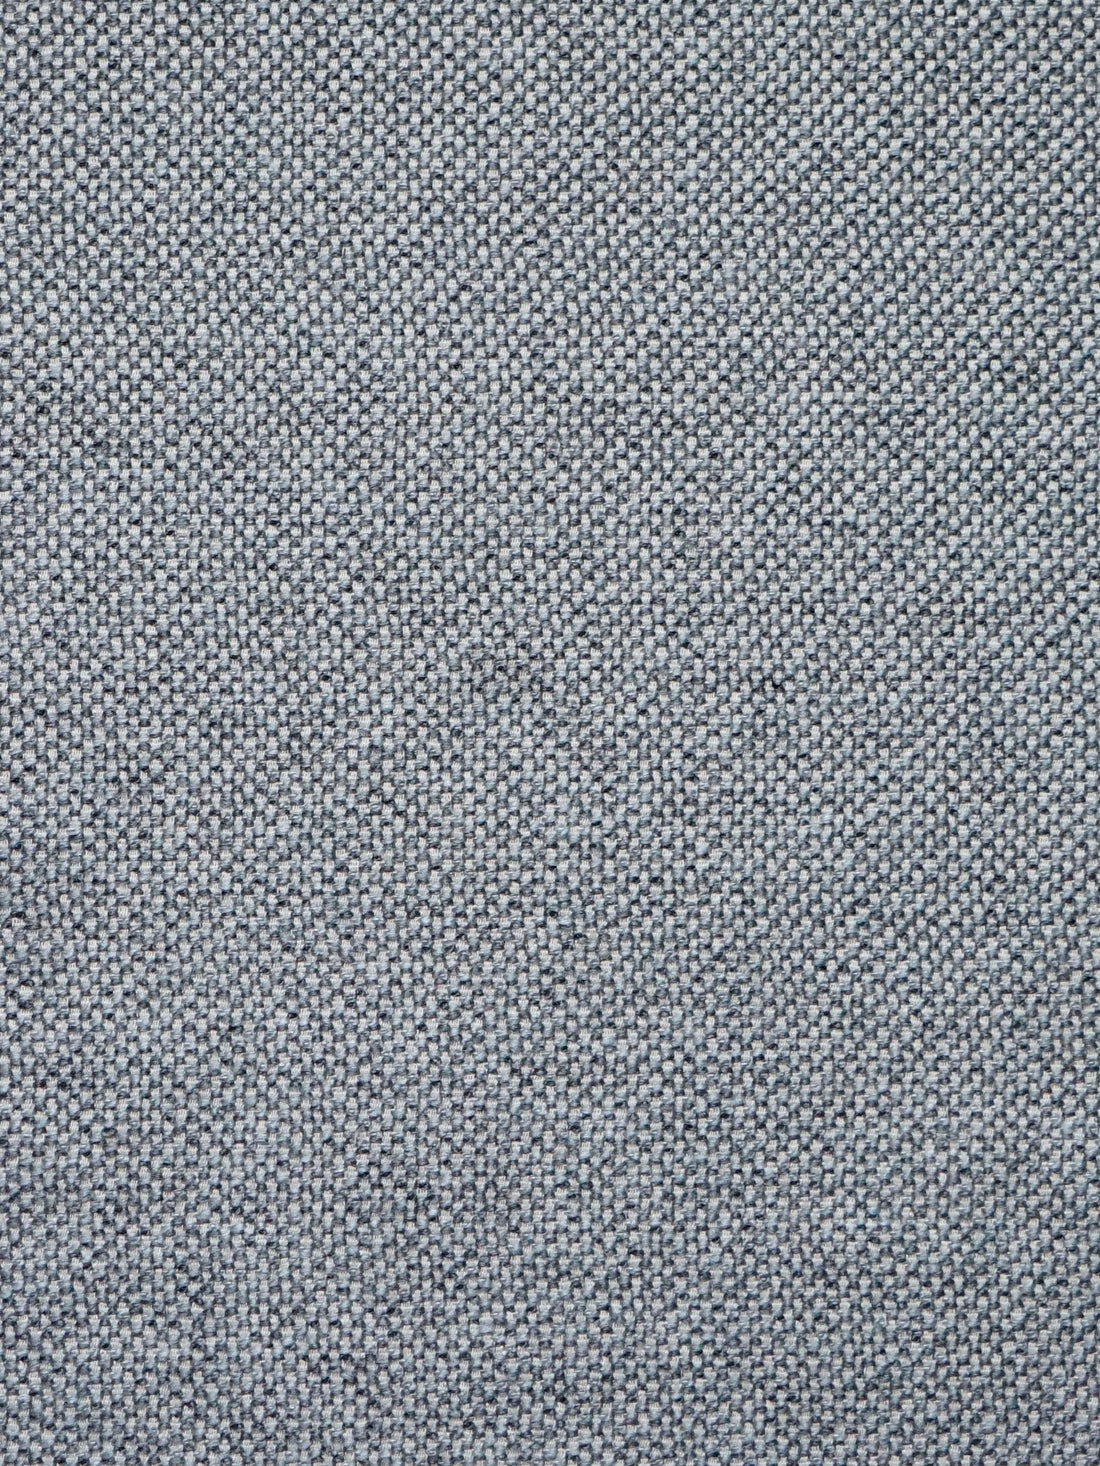 City Tweed fabric in nickel color - pattern number SC 000327249 - by Scalamandre in the Scalamandre Fabrics Book 1 collection